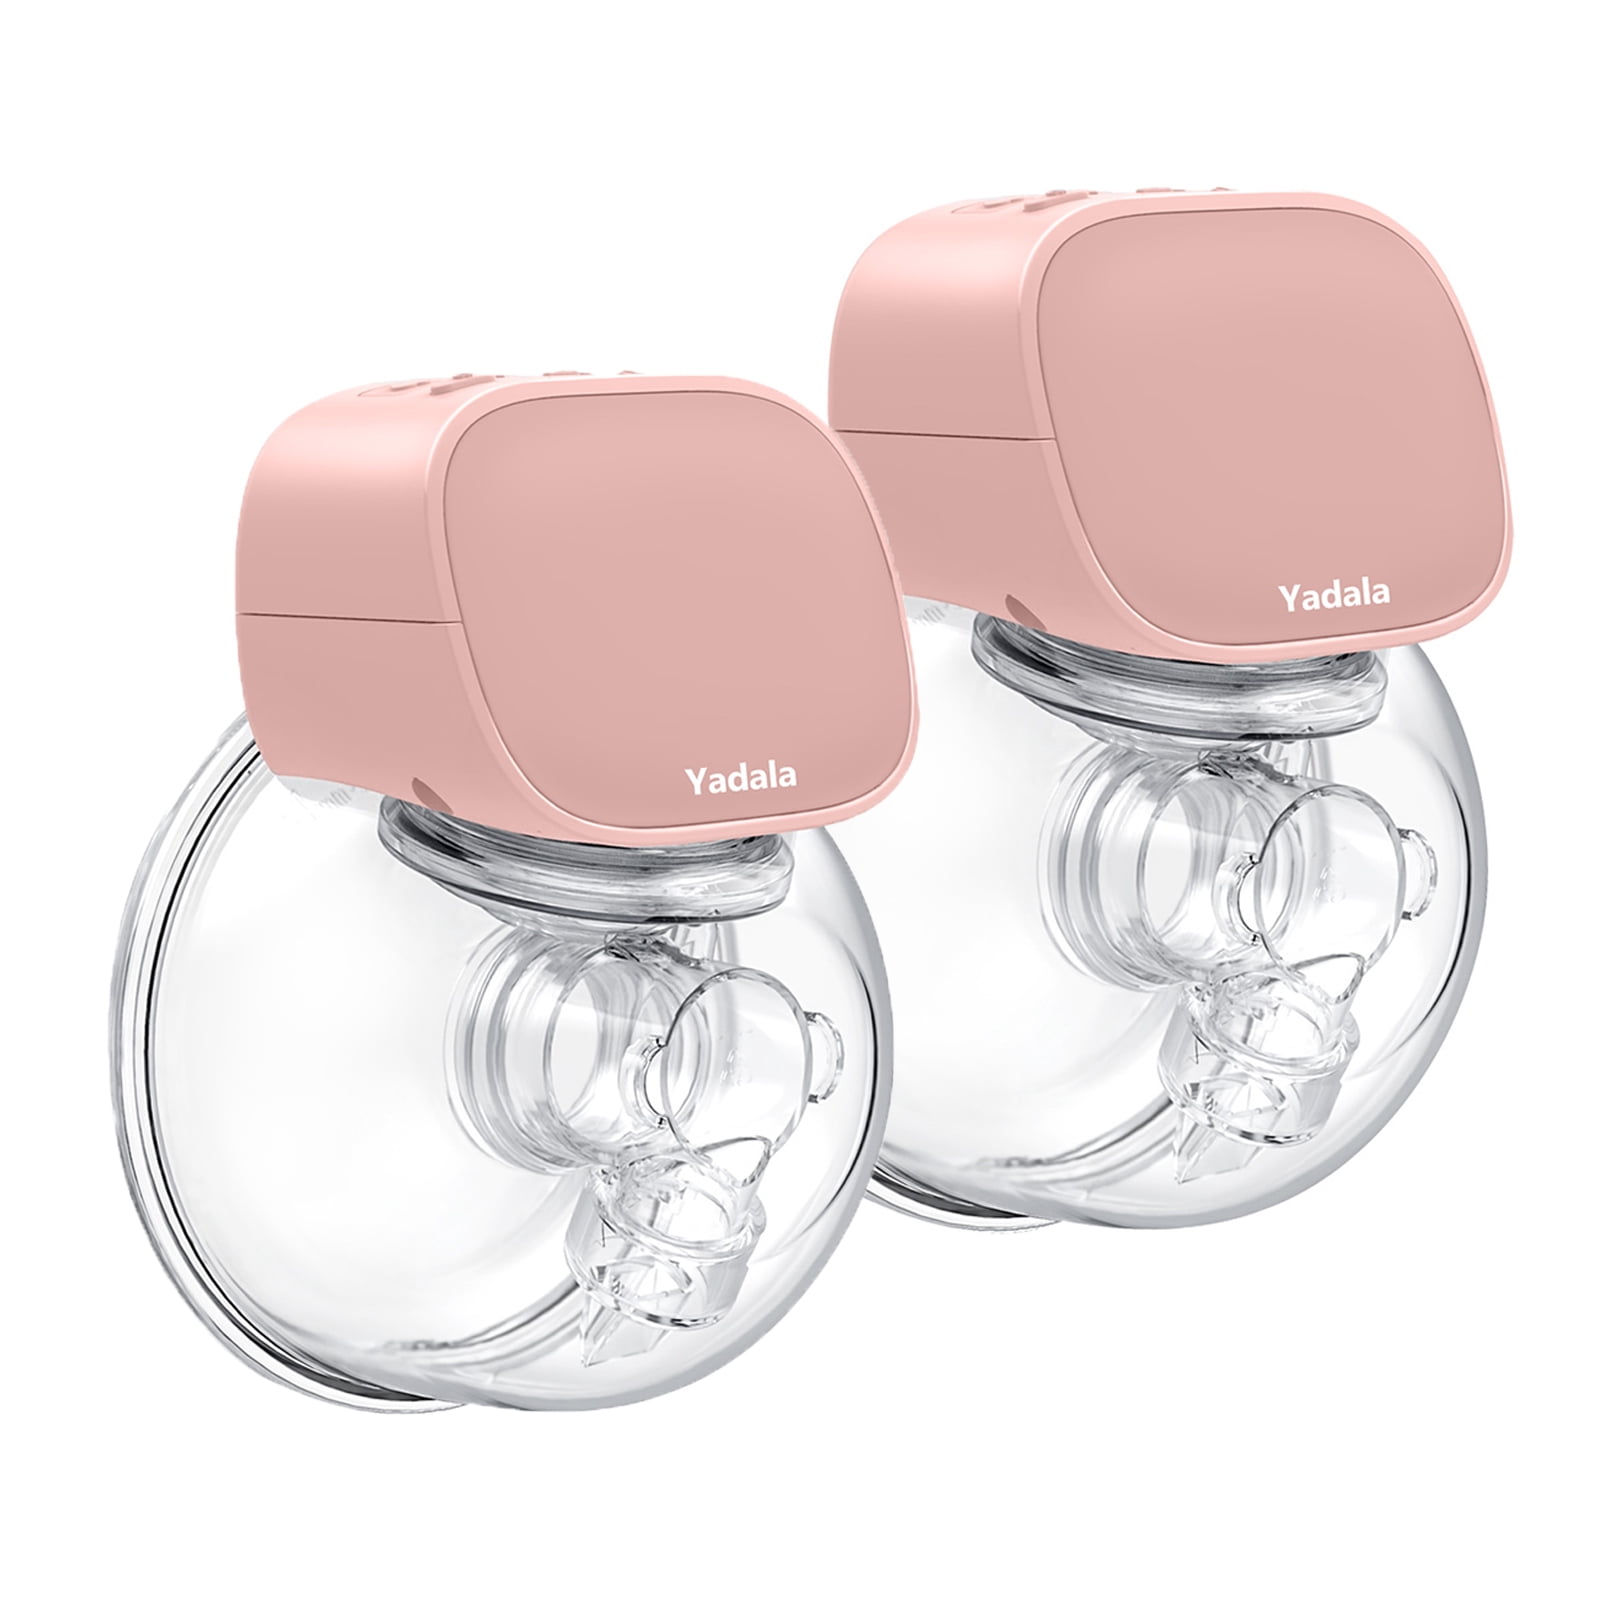 Double Wearable Breast Pump Yadala - Electric Hands-Free Portable Breastfeeding Breastpump, Spill-Proof Ultra-Quiet Pain Free Breast Pump,Light Pink